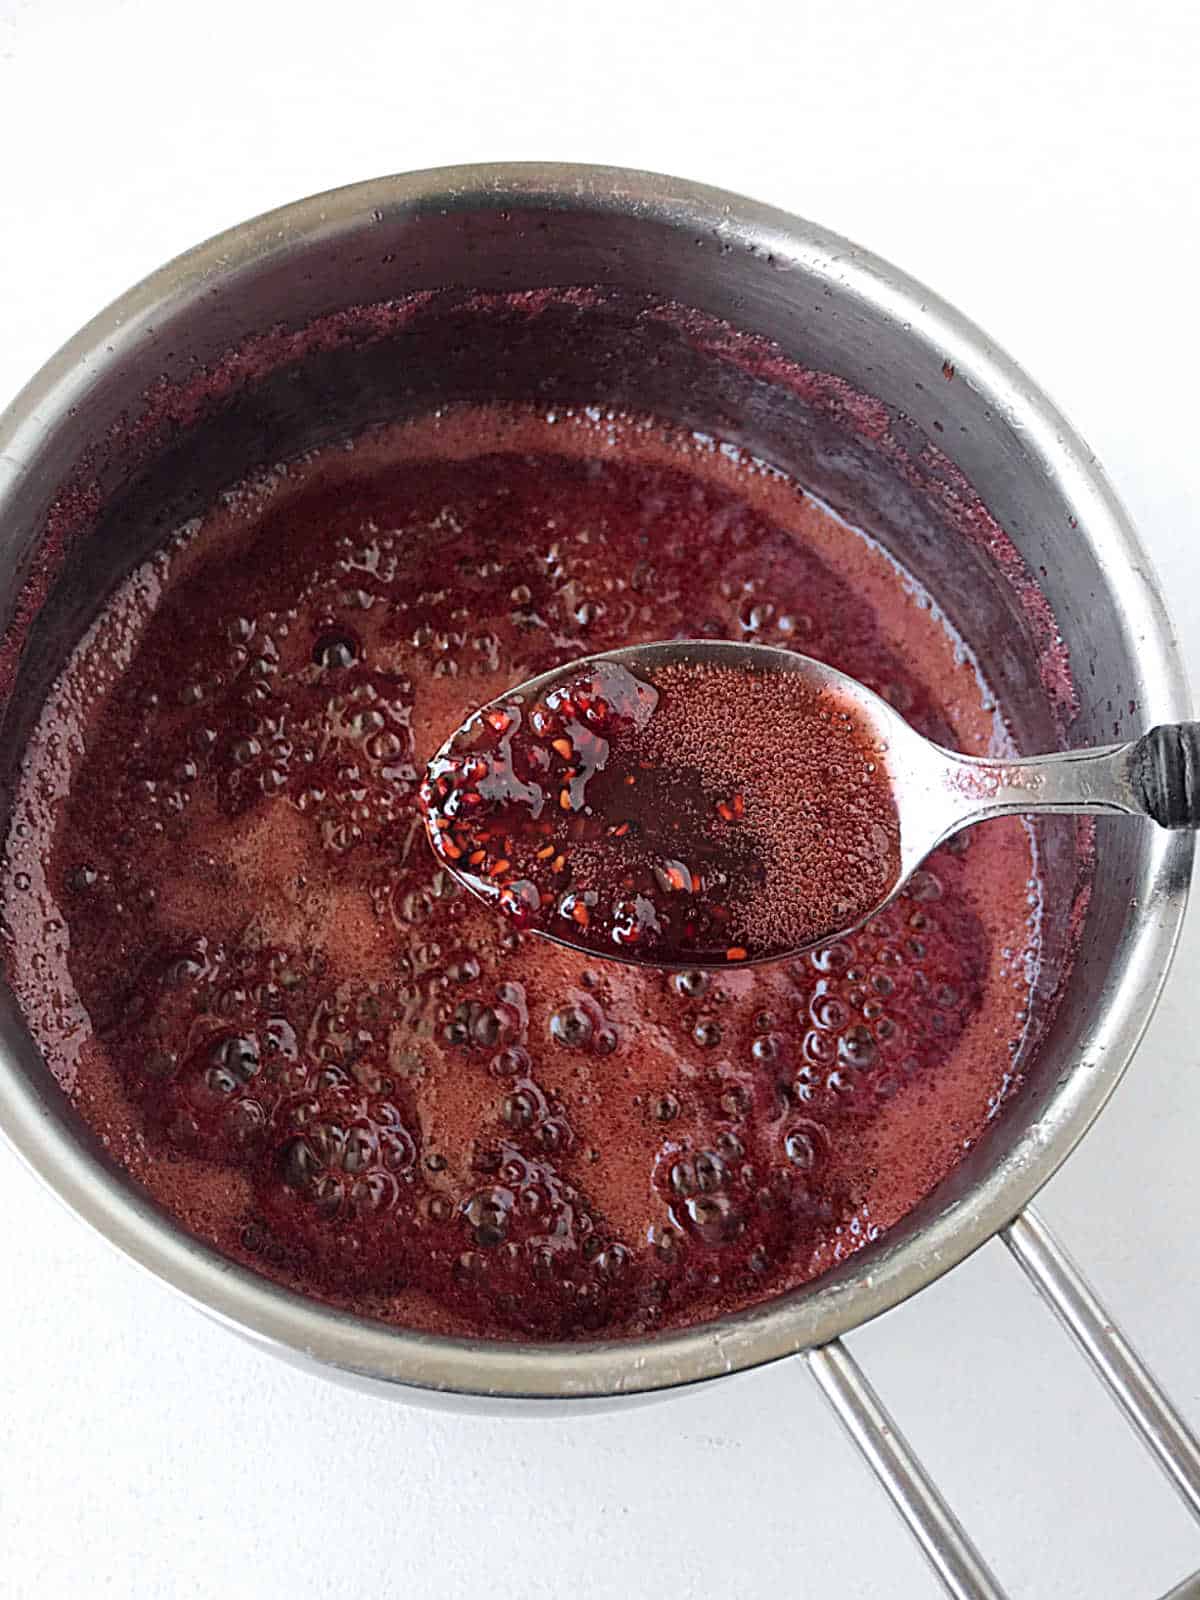 Cooked raspberry filling in a spoon with metal saucepan below with more filling. White surface.